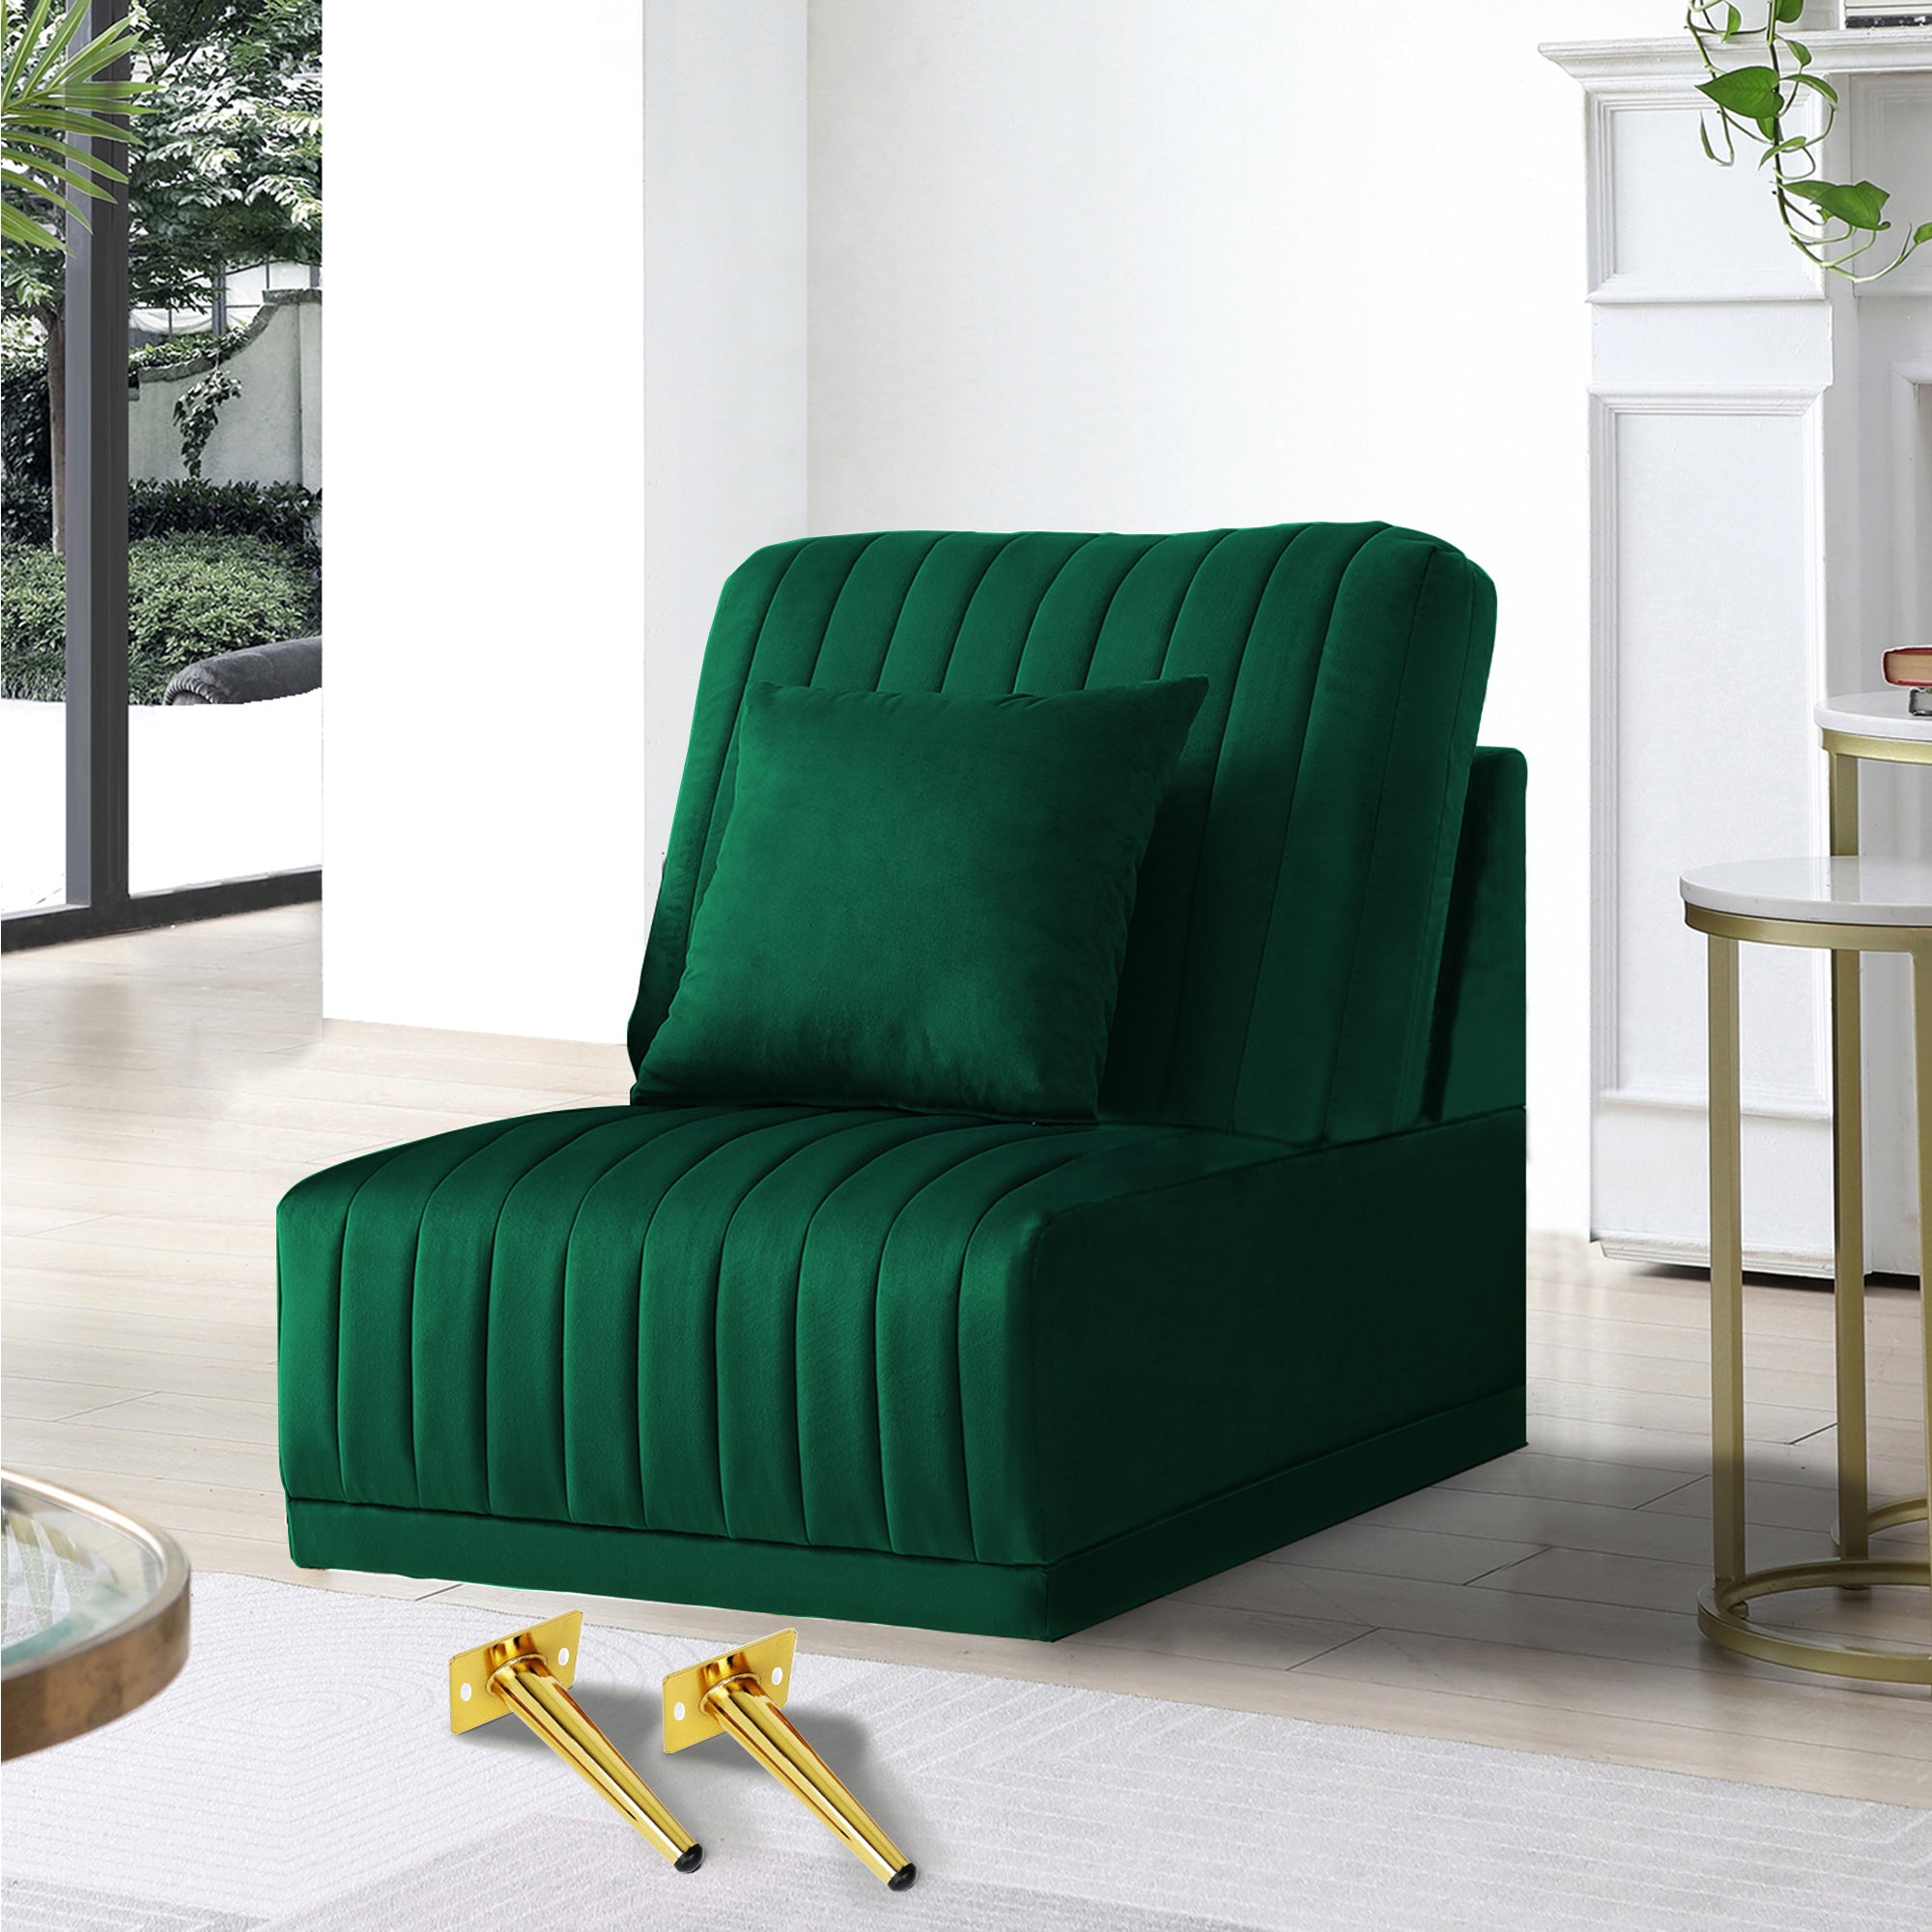 The green sofa without armrests is not sold separately green-foam-velvet